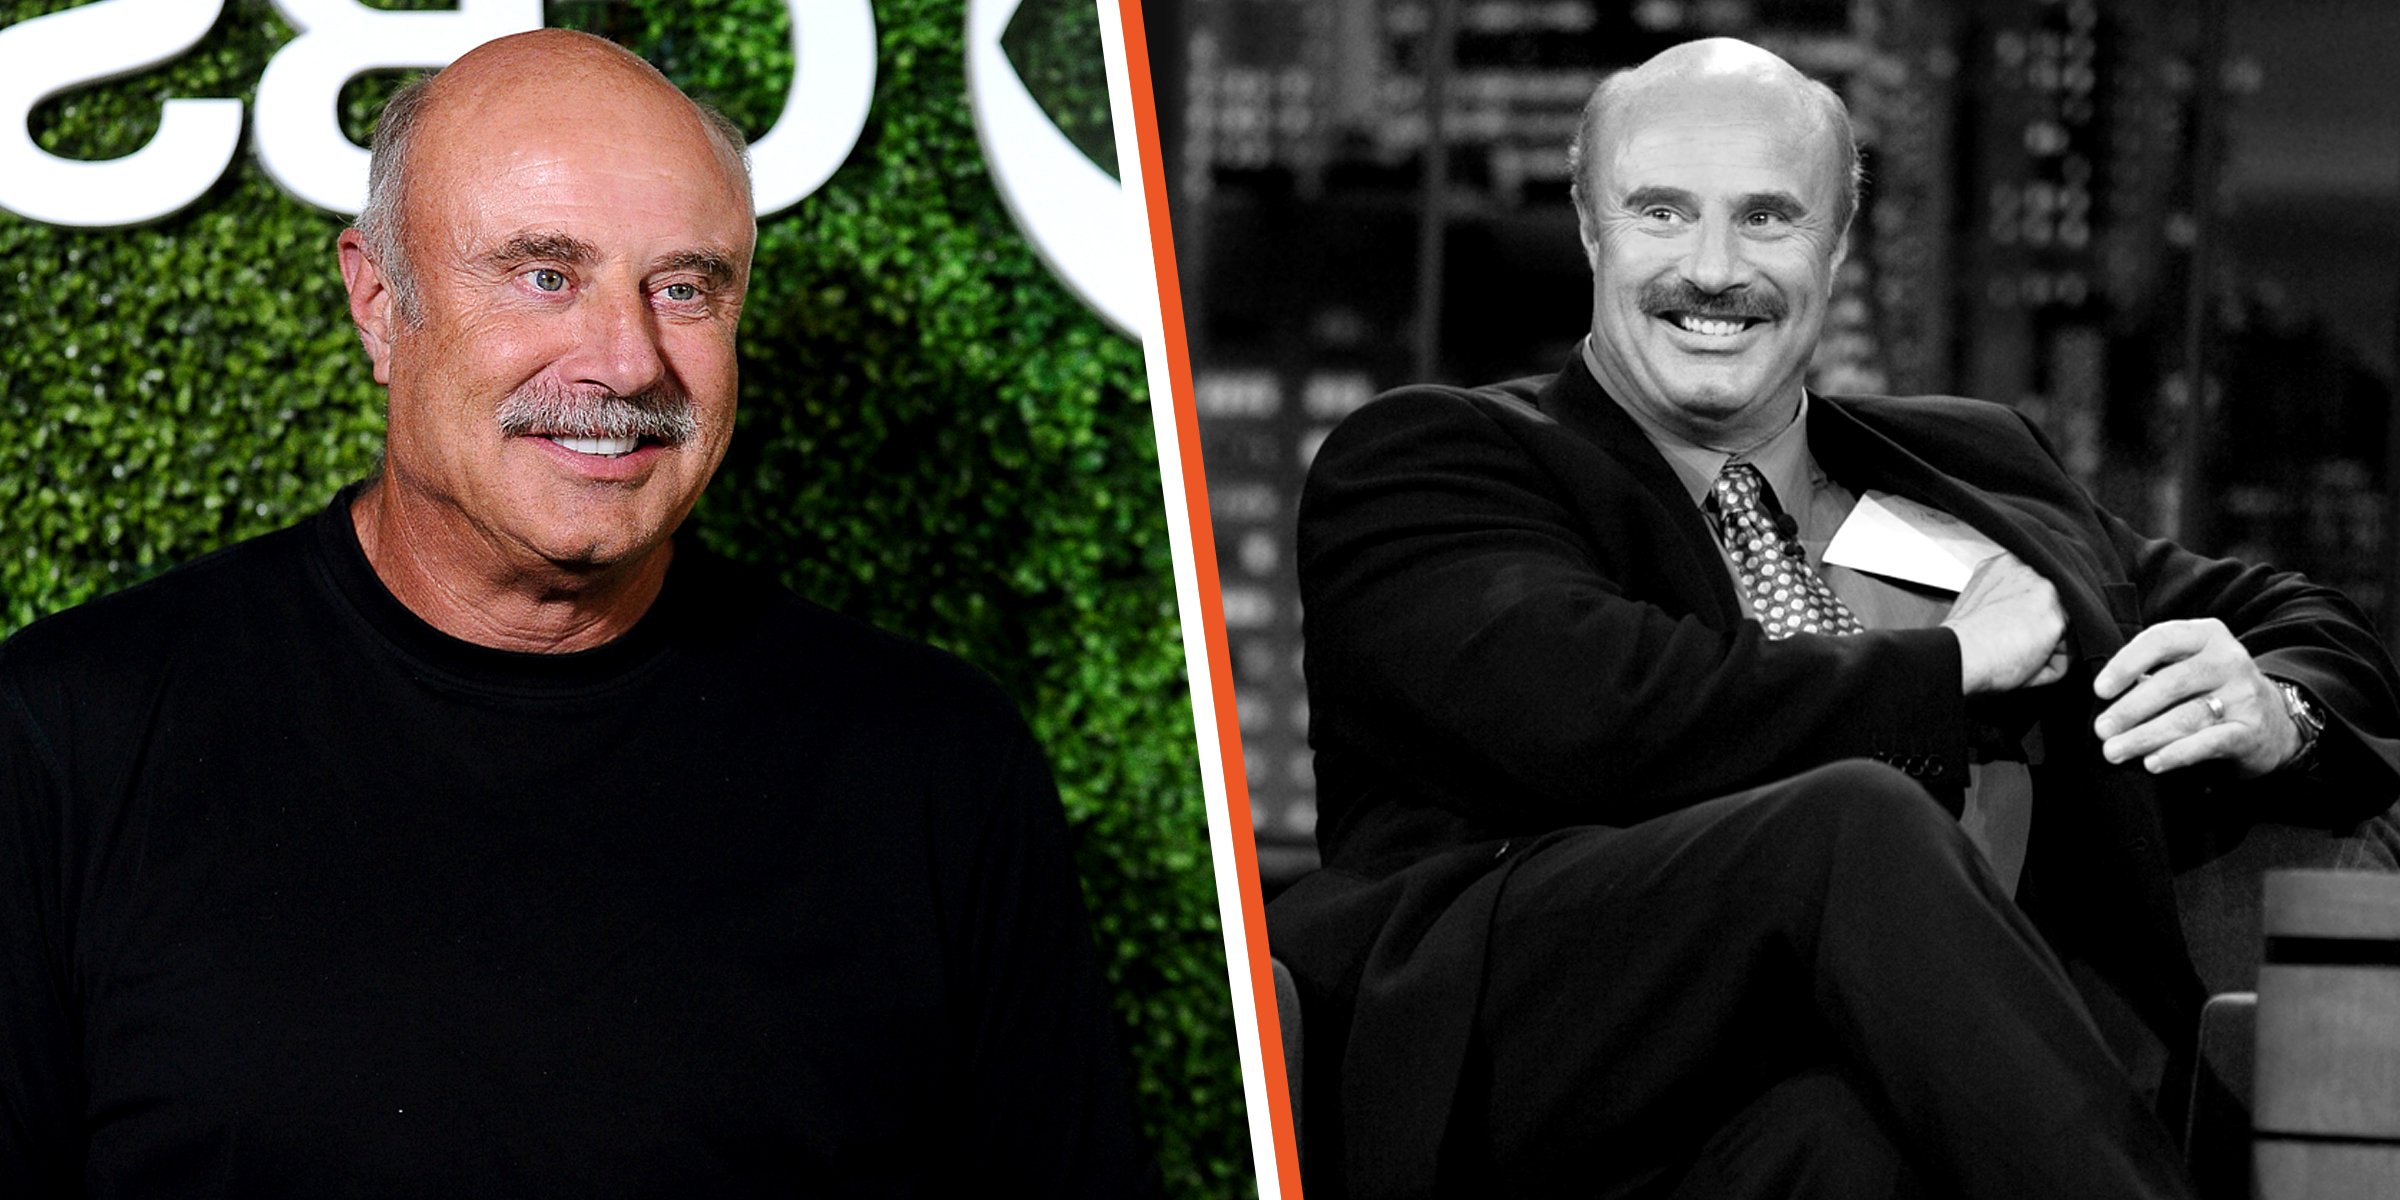 Dr Phil's 1st Wife Felt 'Trapped' as He Controlled Her Every Action & Brought Women to Their Home